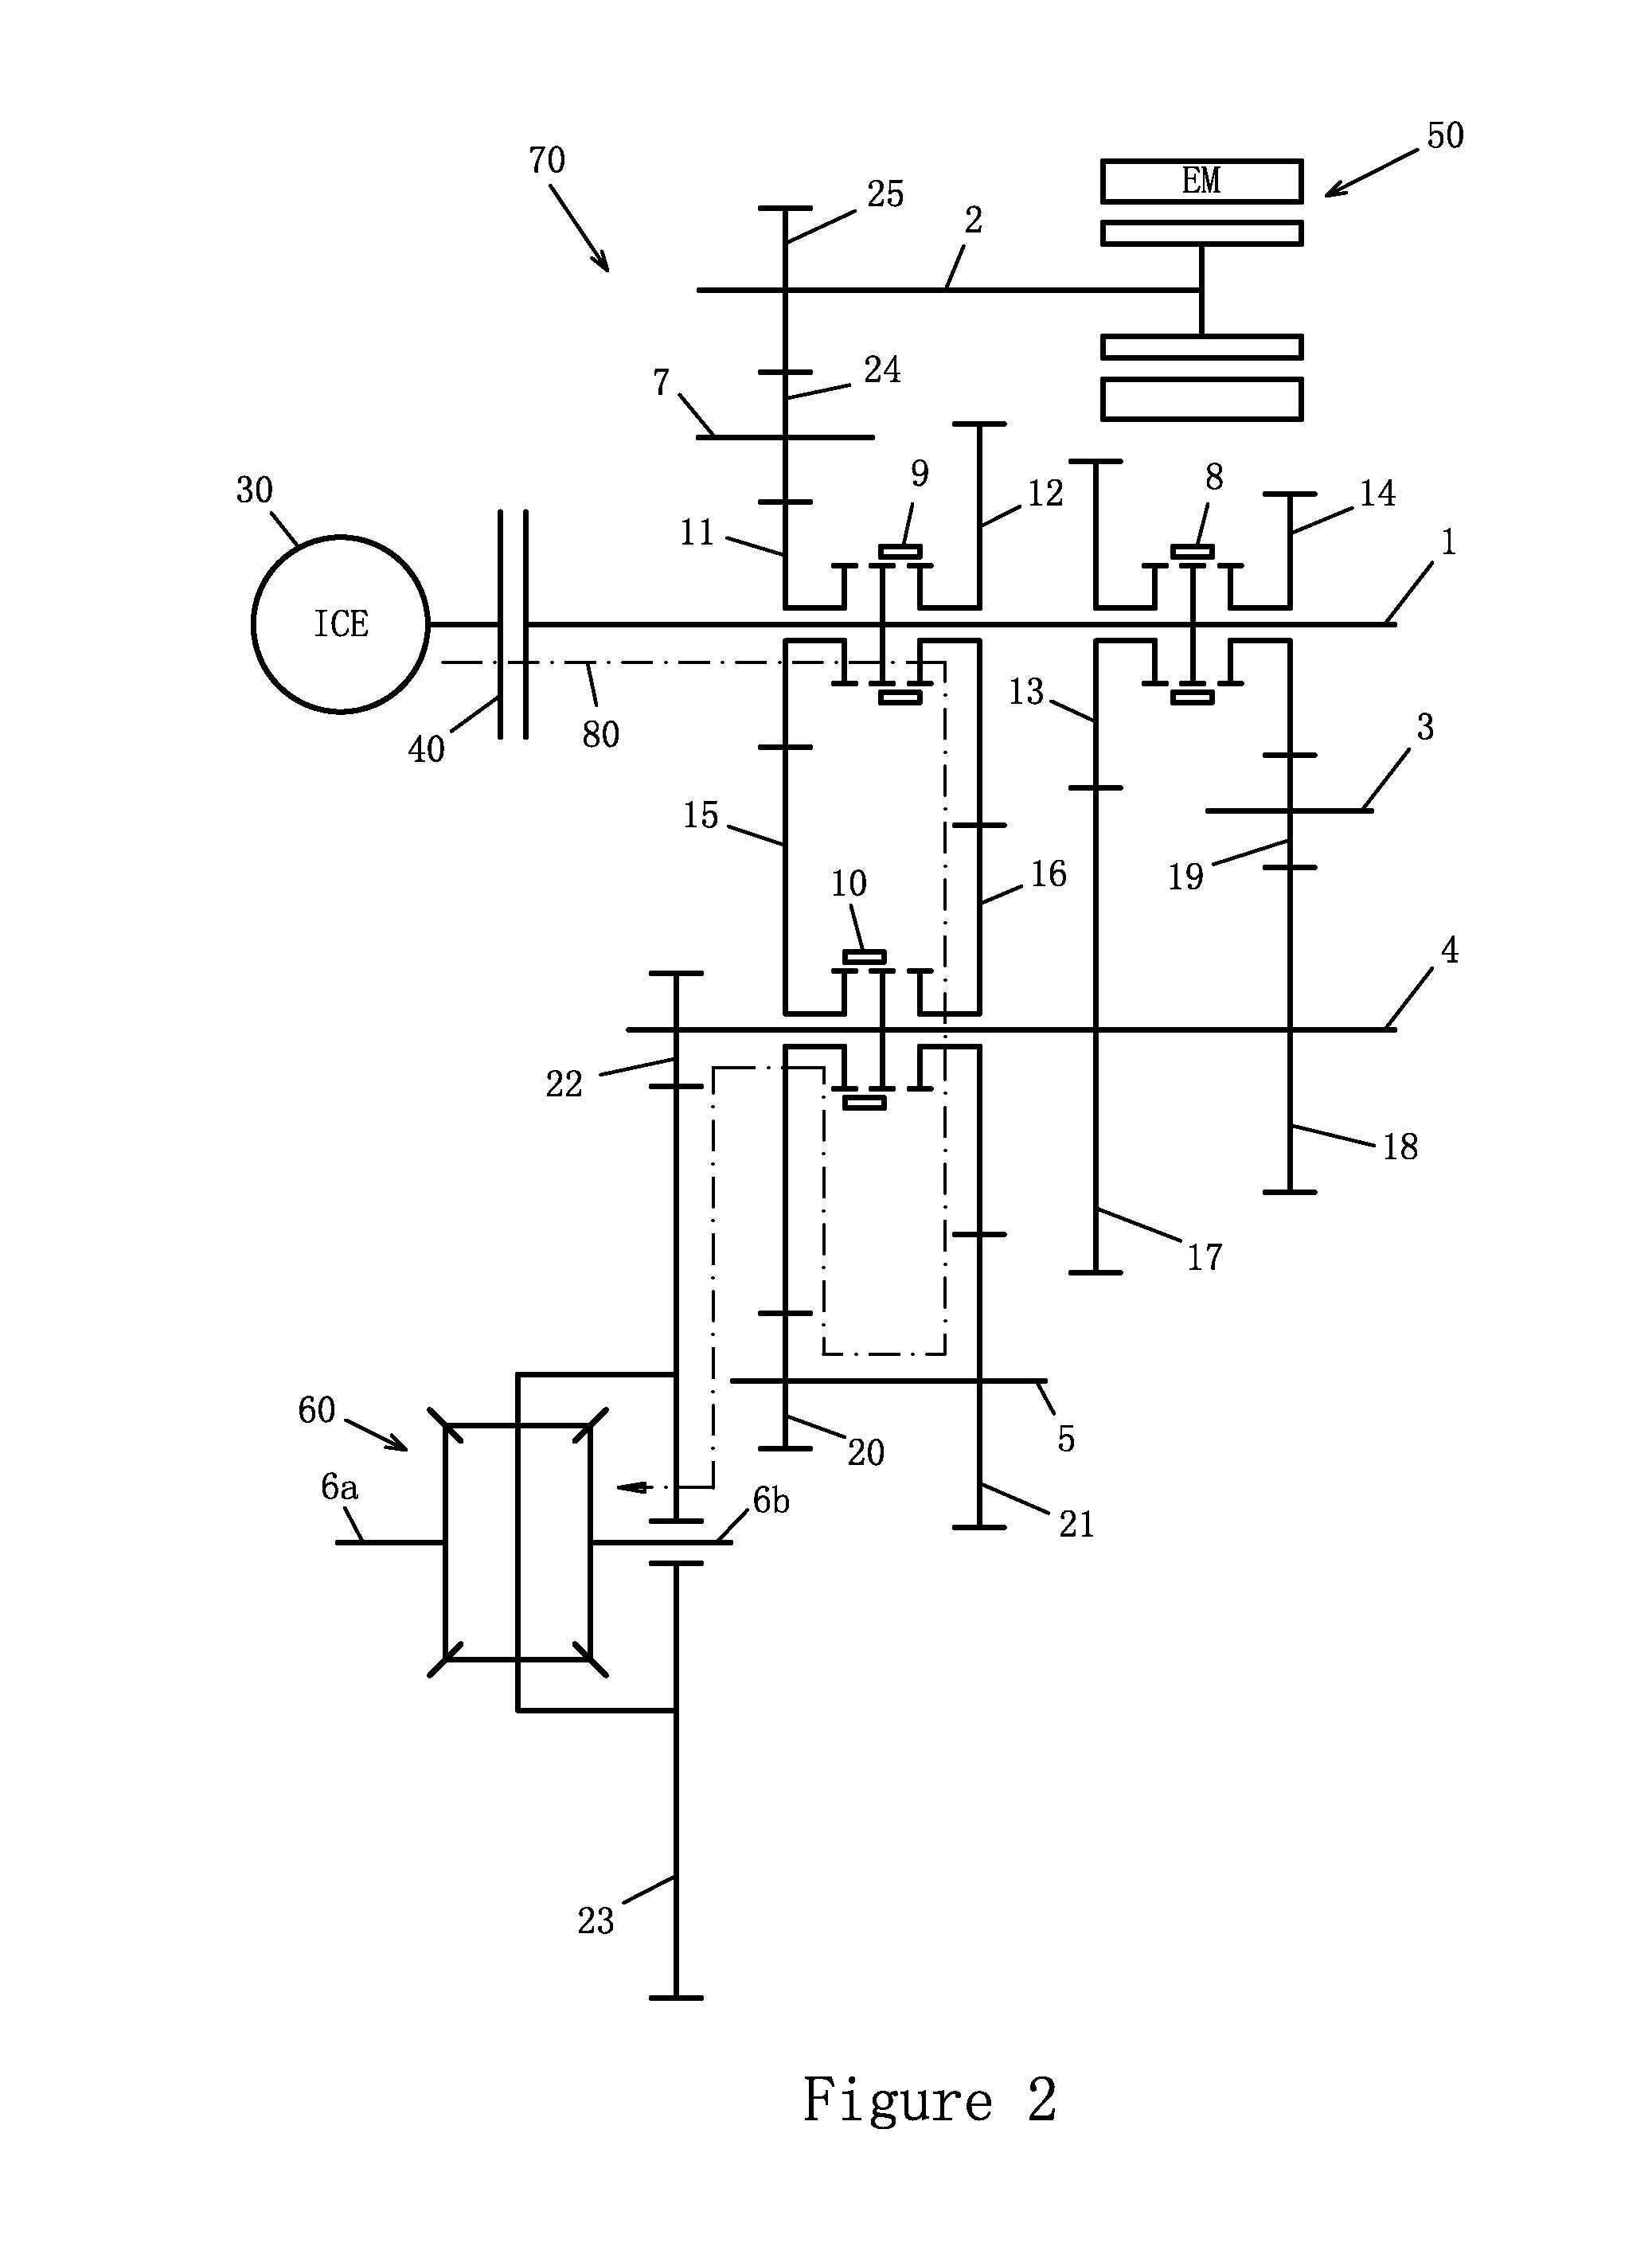 Hybrid-power driving system for a vehicle and a transmission thereof